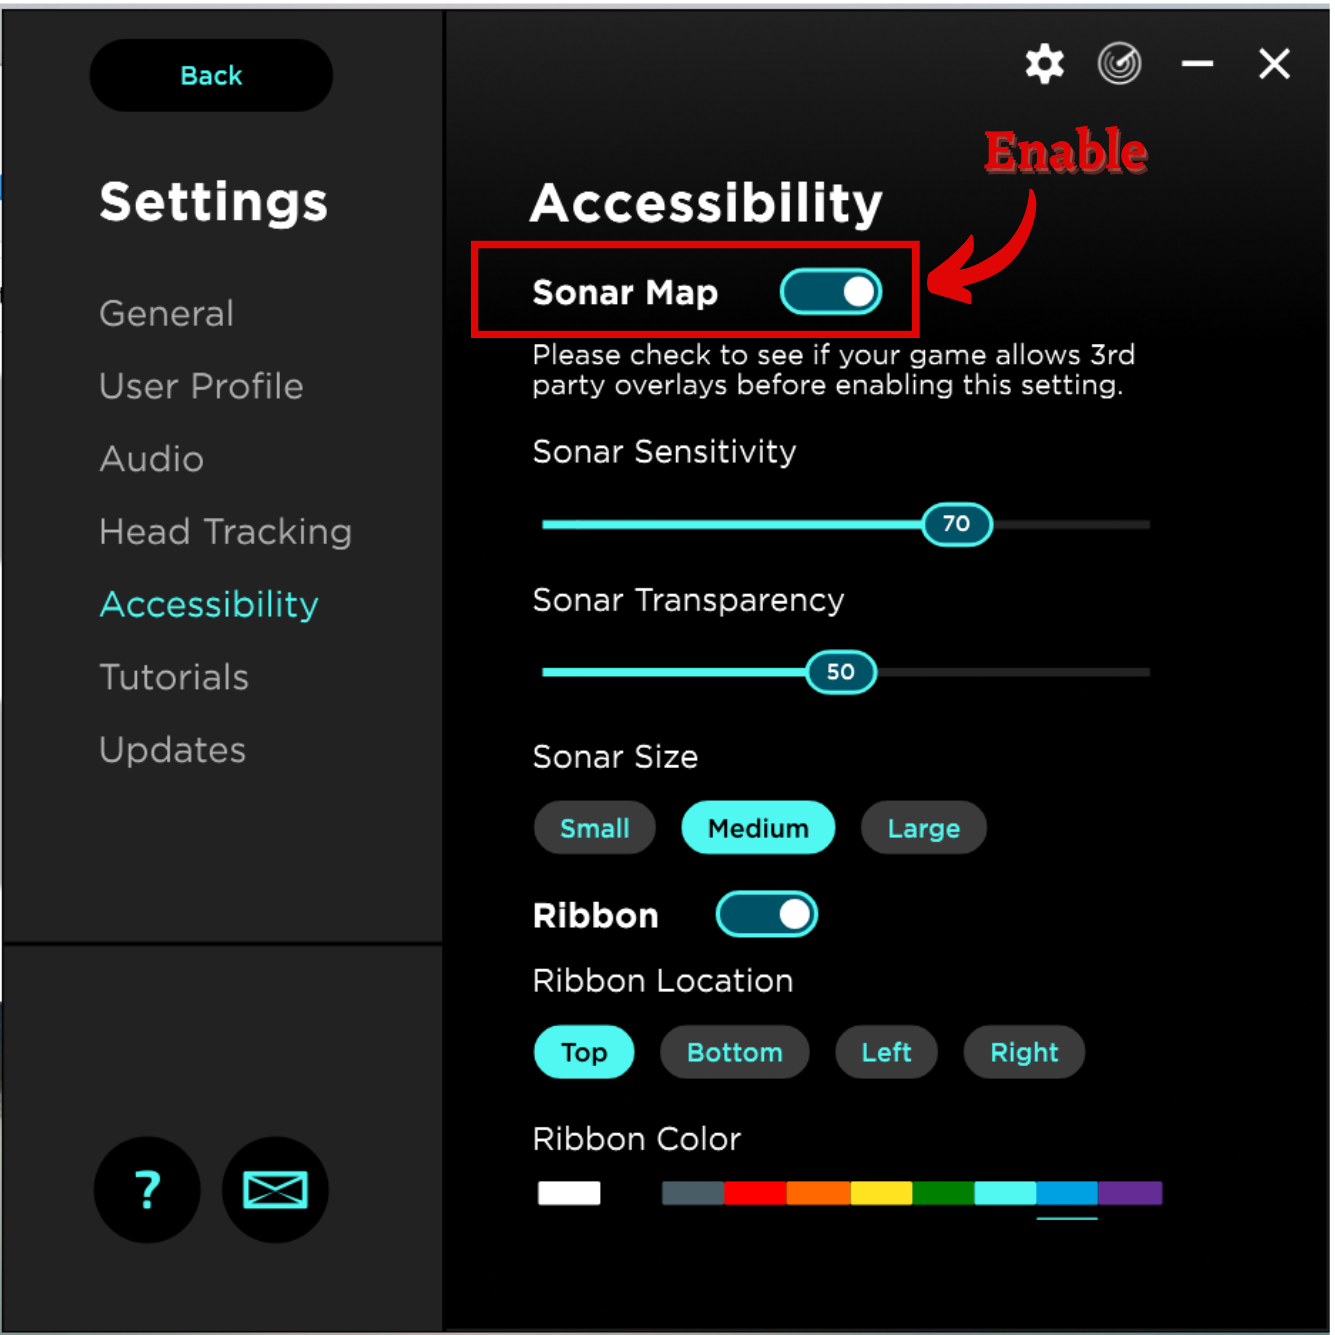 Logitech_HT_Accessibility_tab_02.png